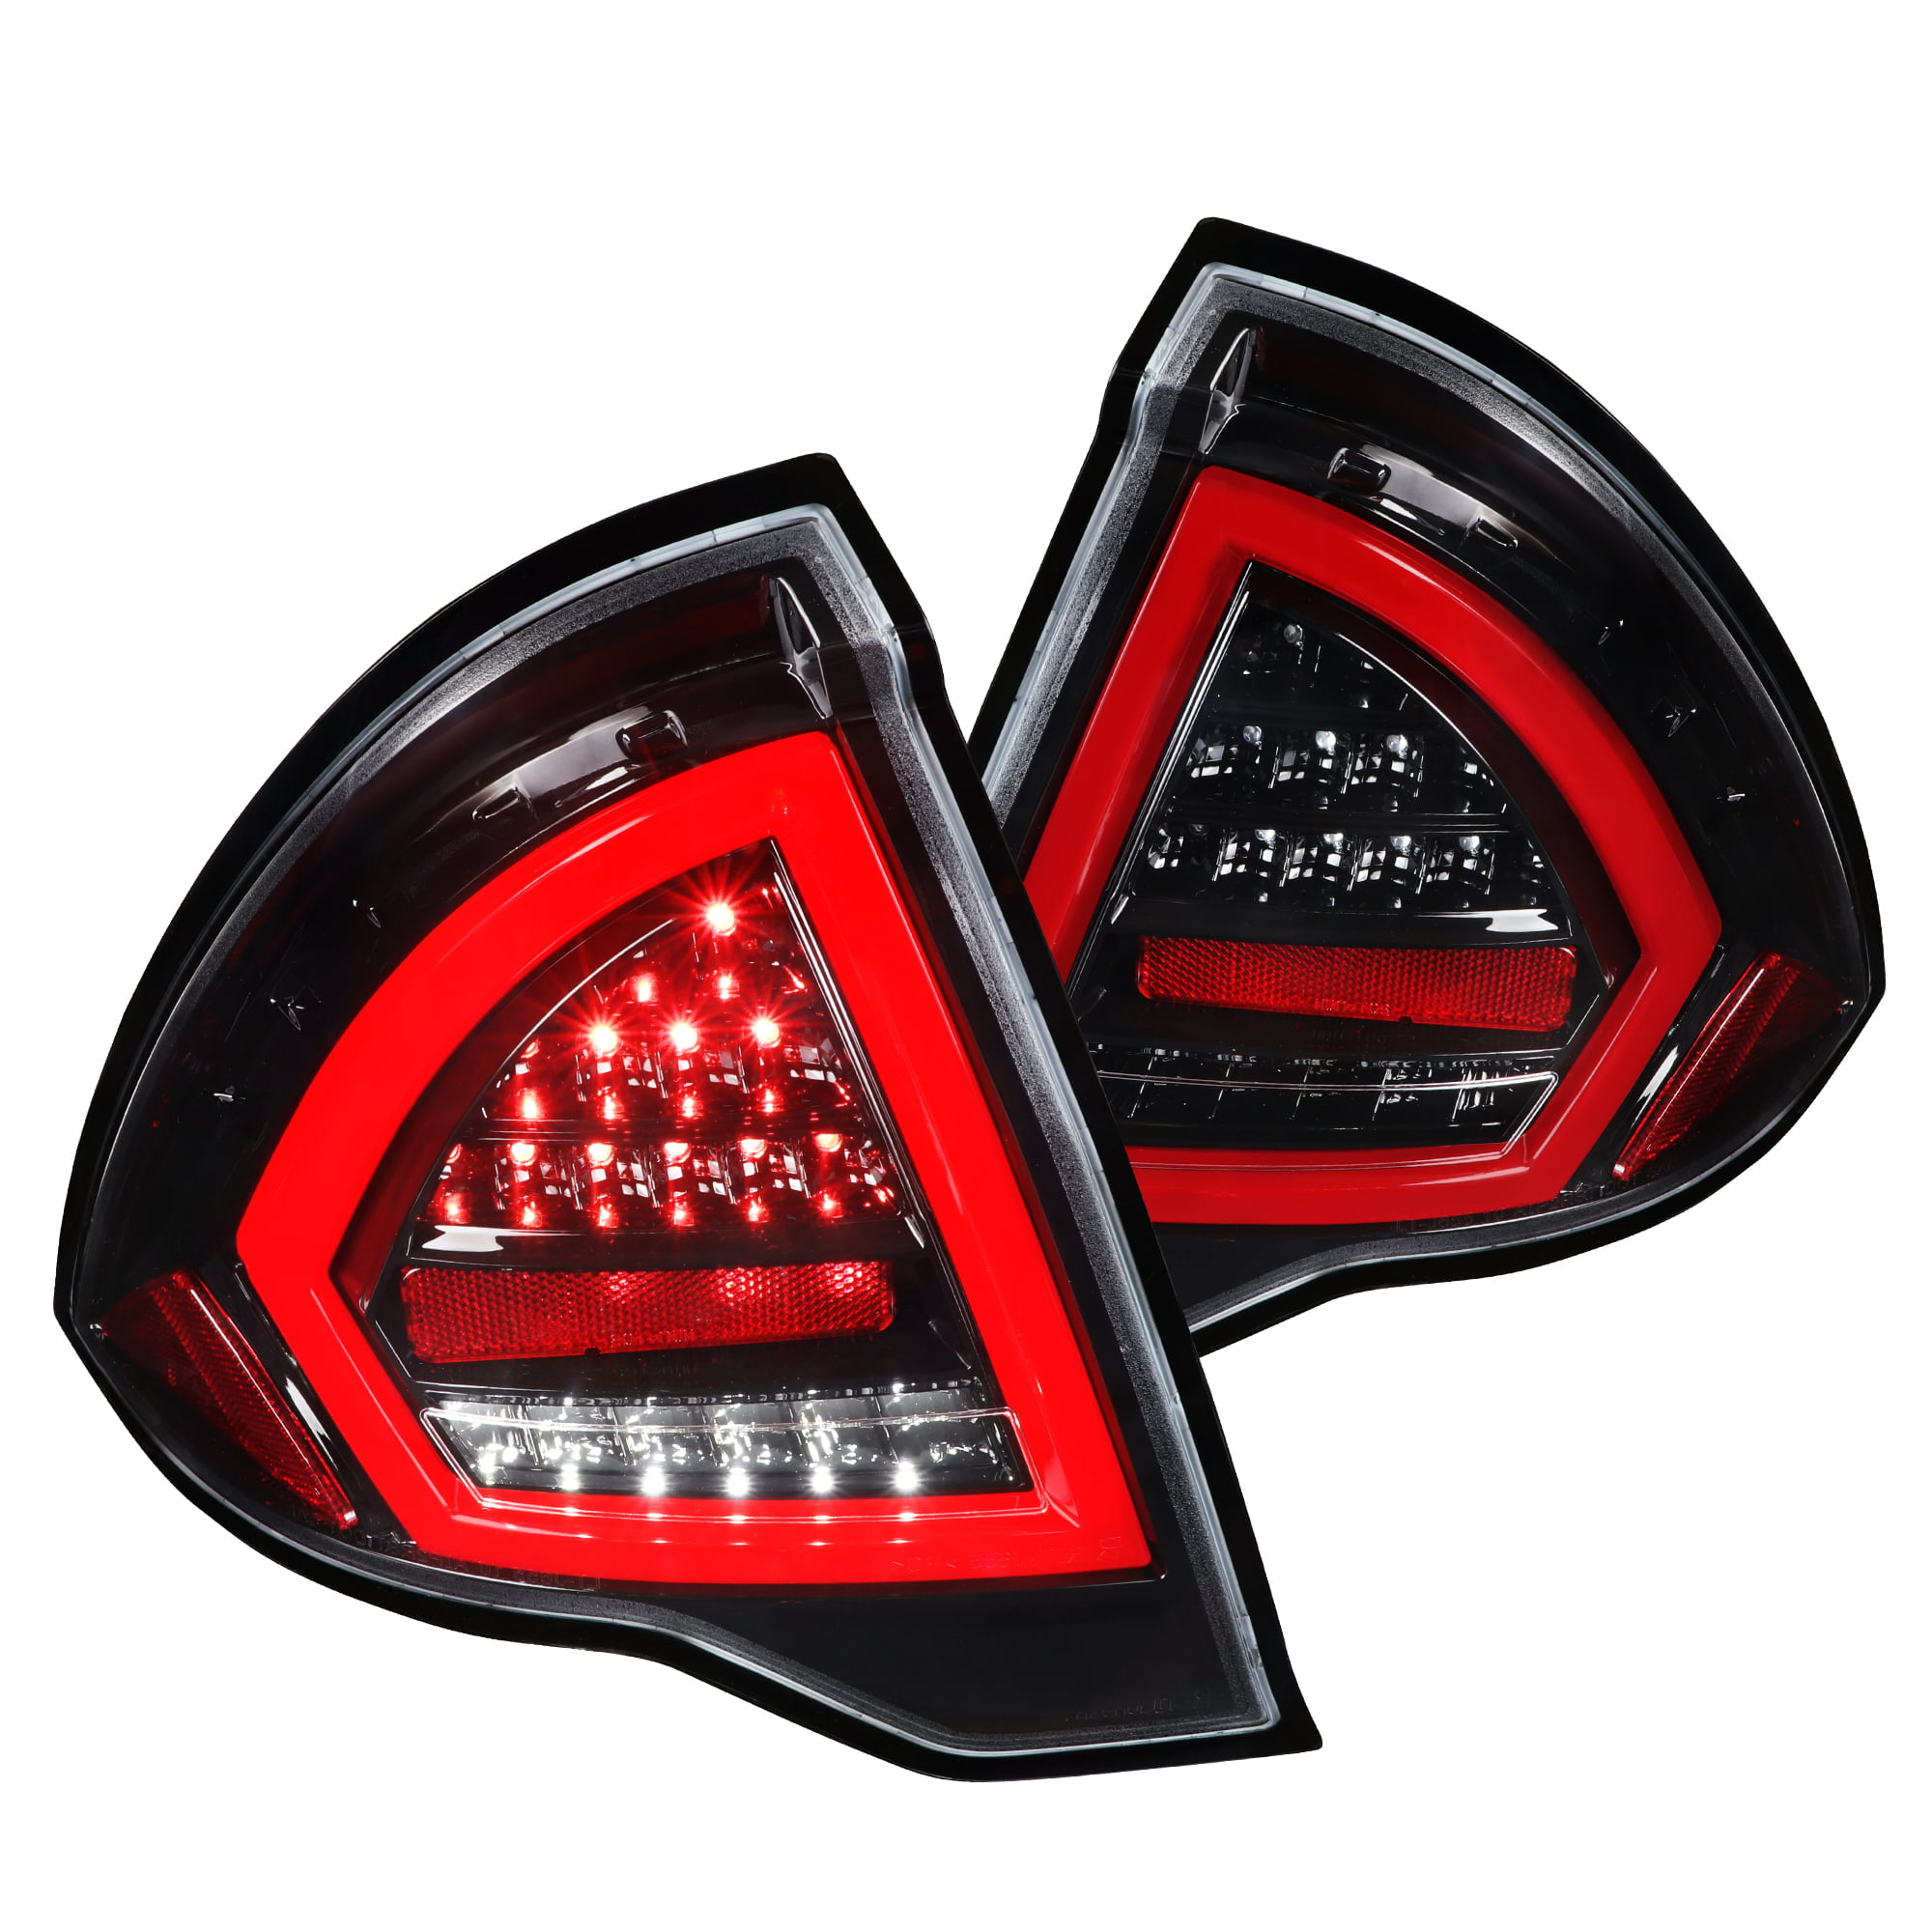 Spec-D Tuning LED Bar Tail Lights for 2010-2012 Ford Fusion Taillights Assembly Left + Right 2011 Ford Fusion Tail Light Bulb Replacement